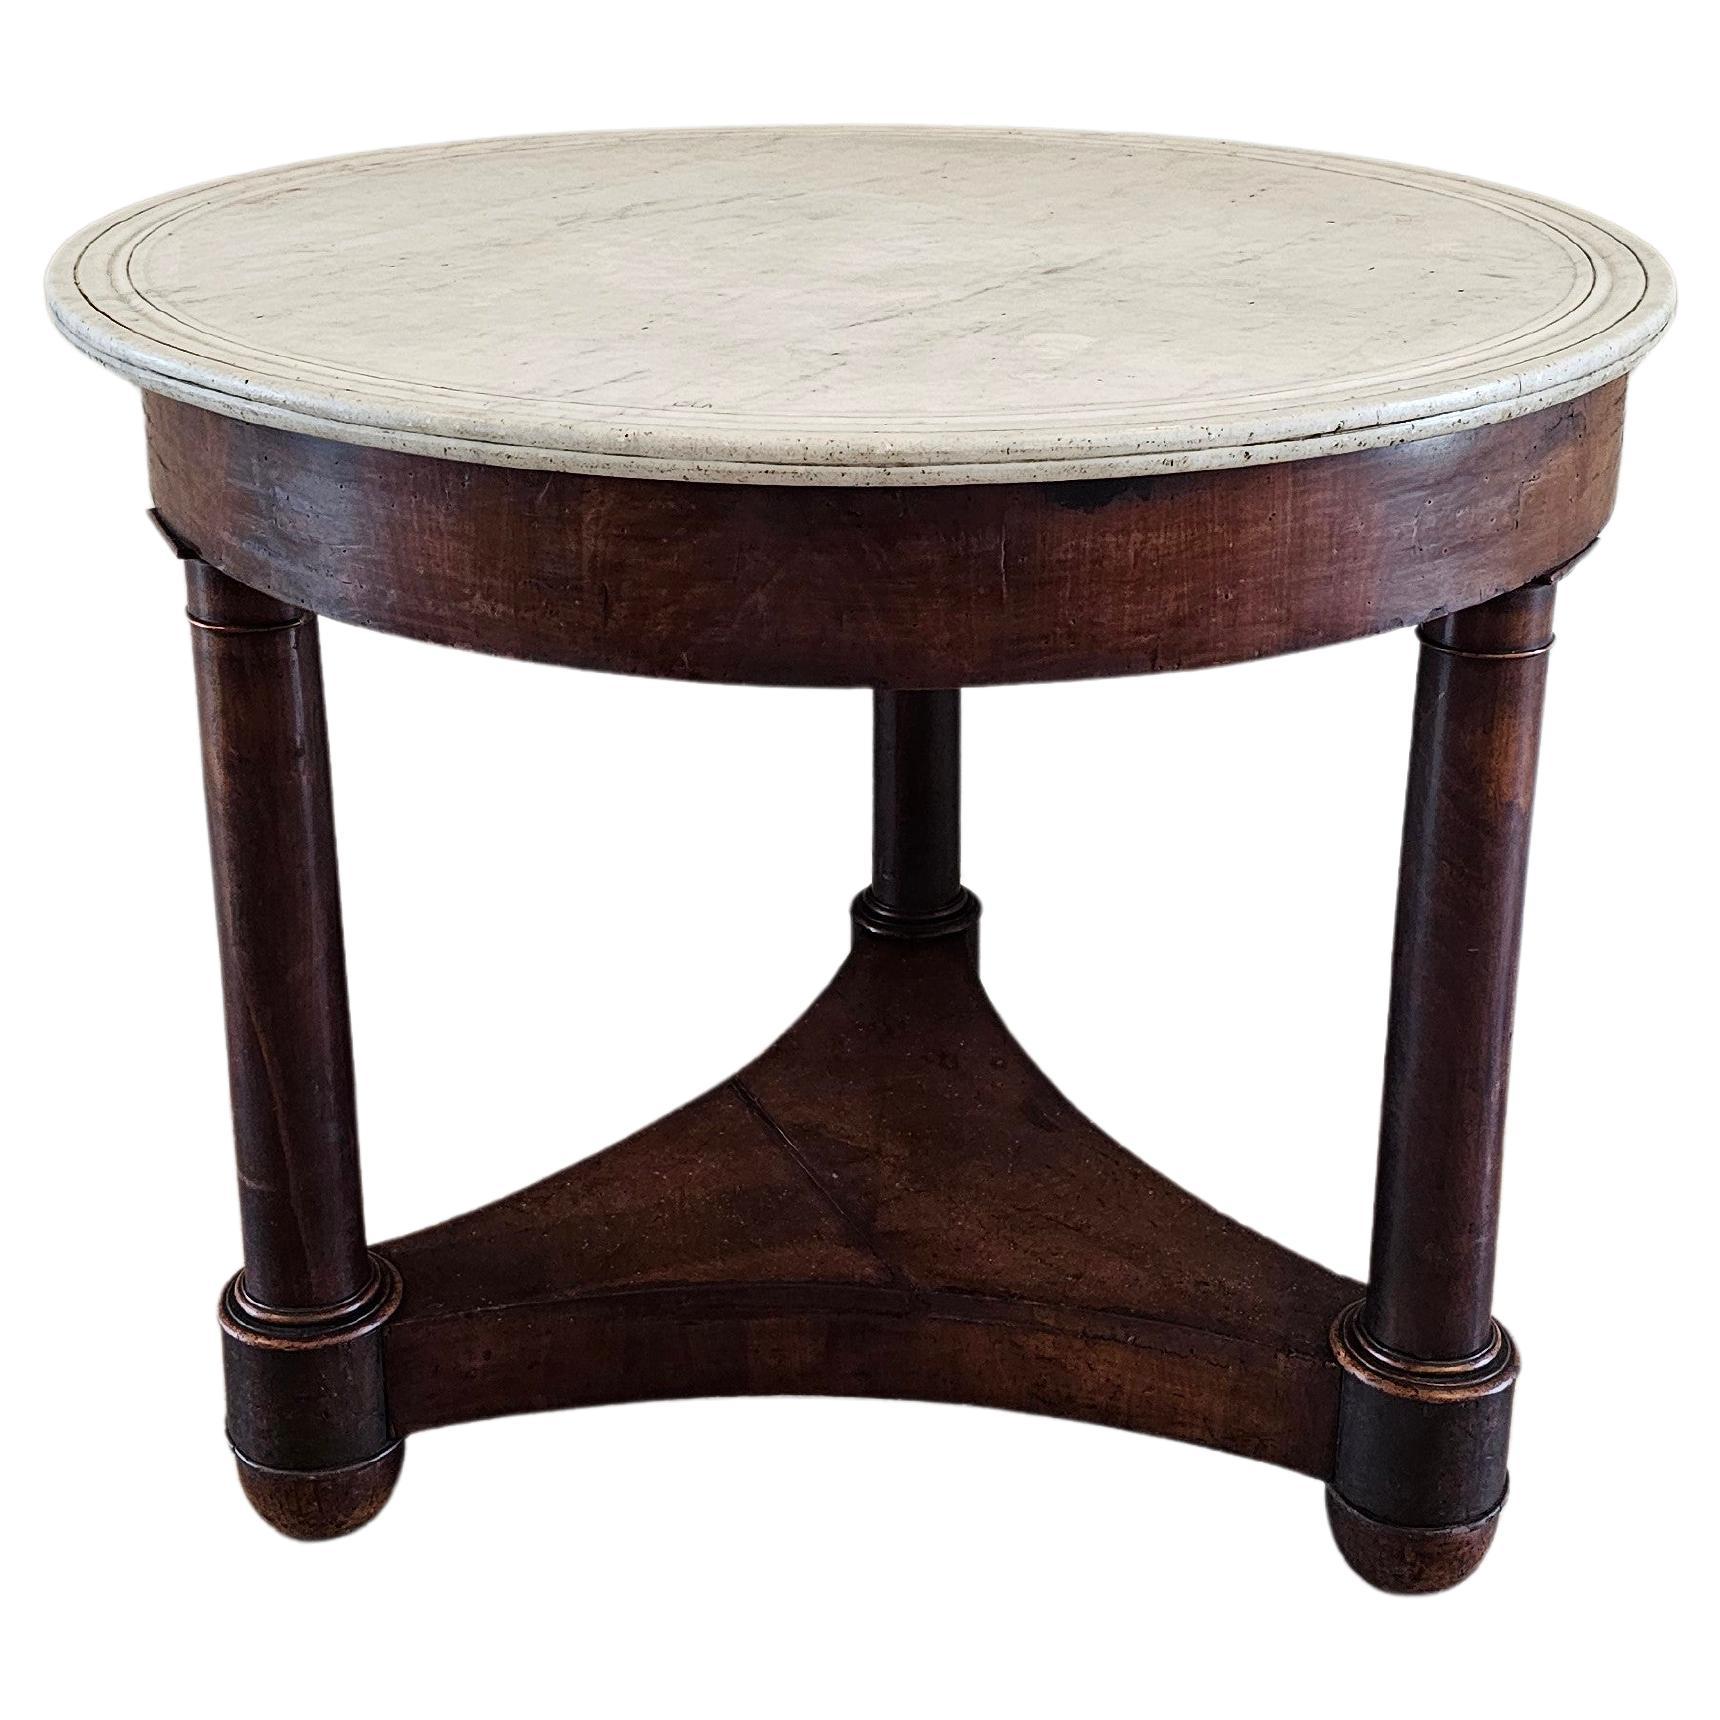 A 200 year old period French Empire mahogany pedestal table guéridon with beautifully aged heavily worn warm rich dark patina. circa 1810

Hand-crafted in France in the early 19th century, have a white dished double molded marble top, over